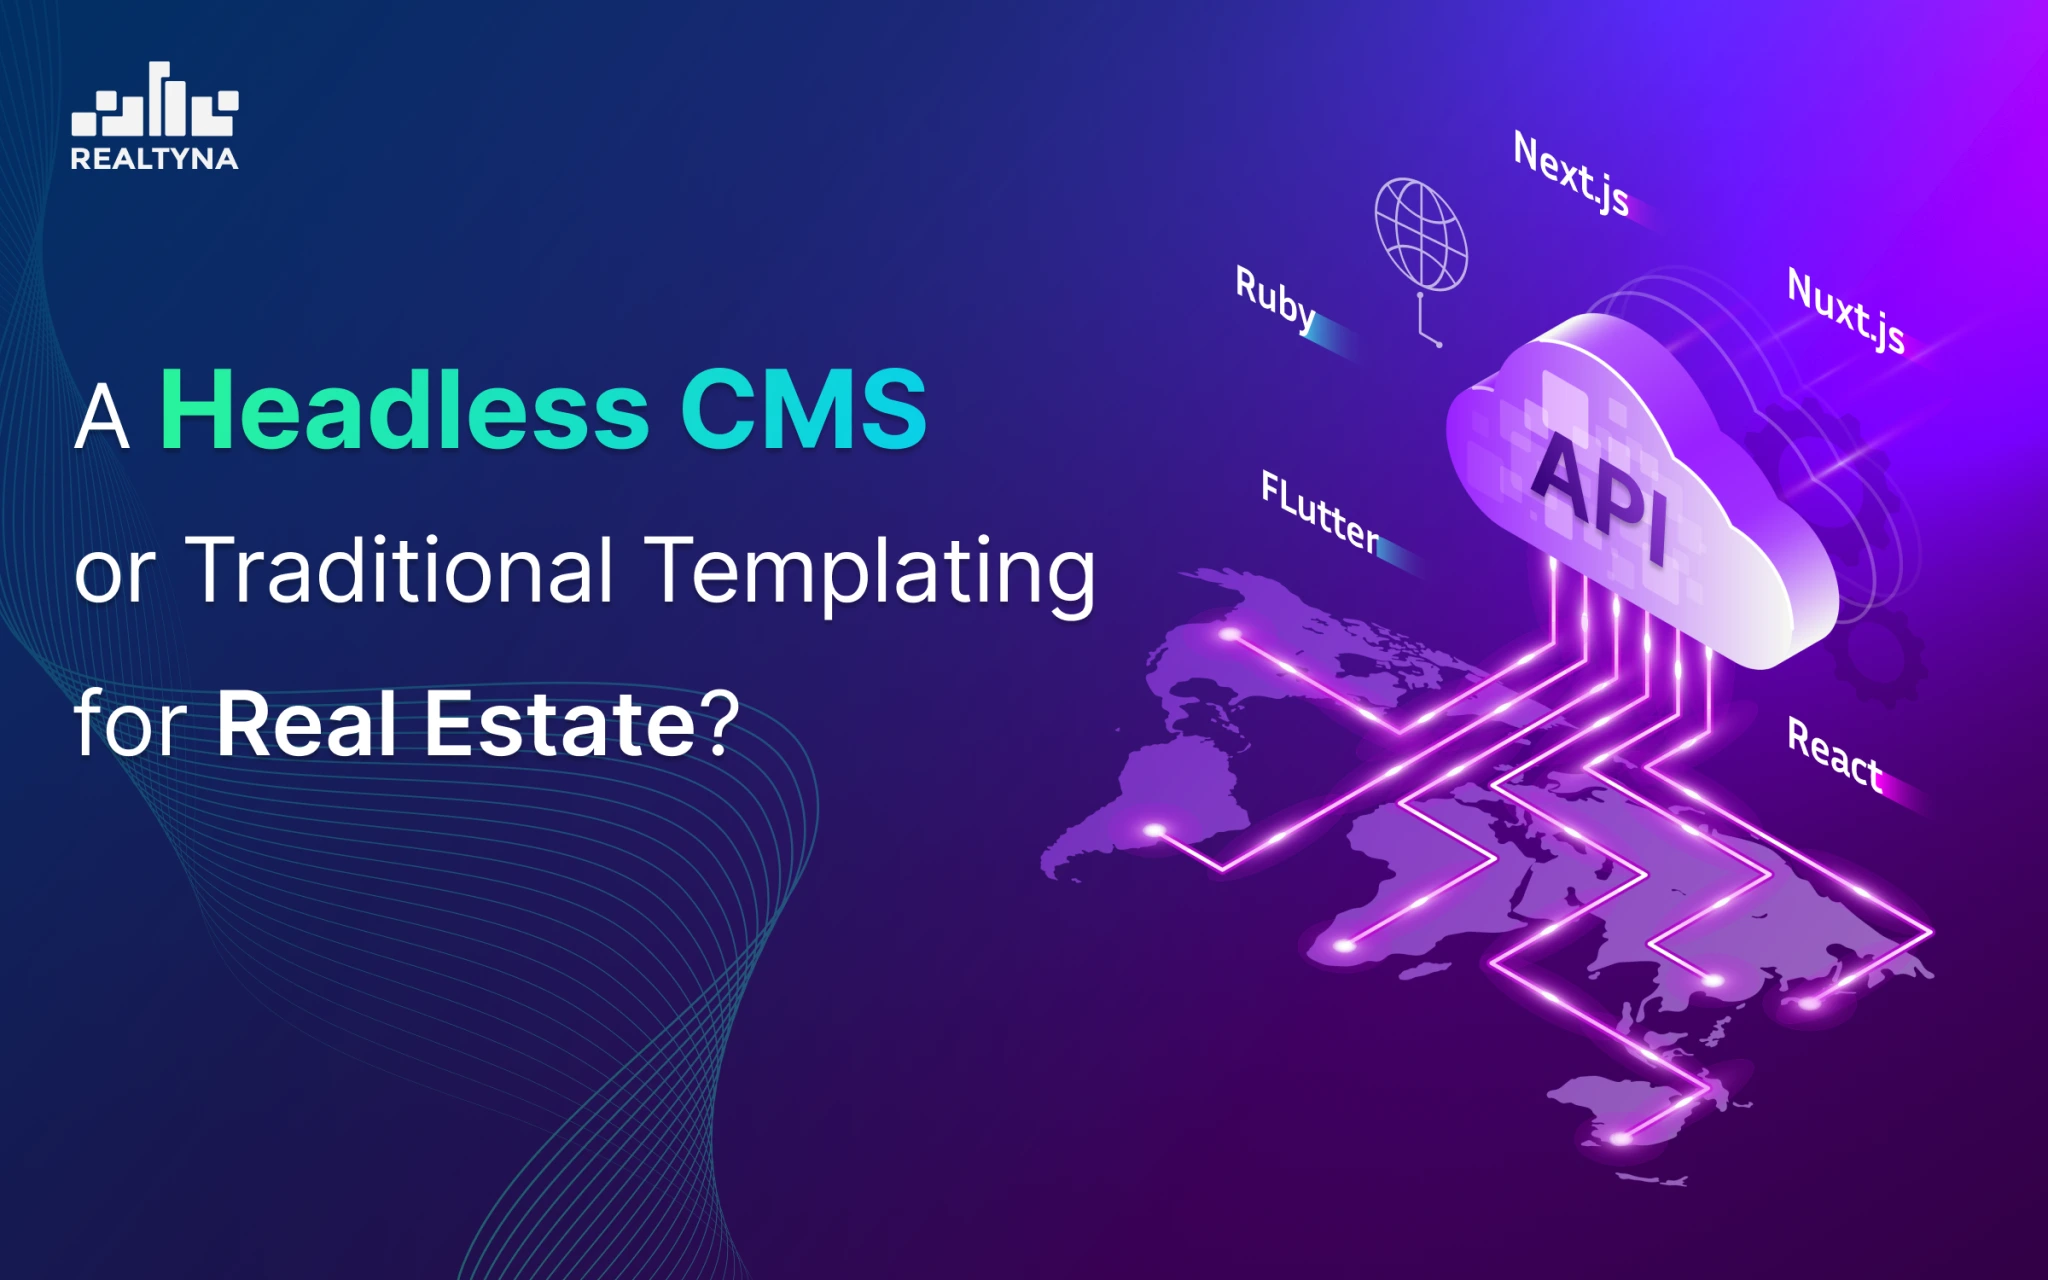 A Headless CMS Vs Traditional Templating for Real Estate